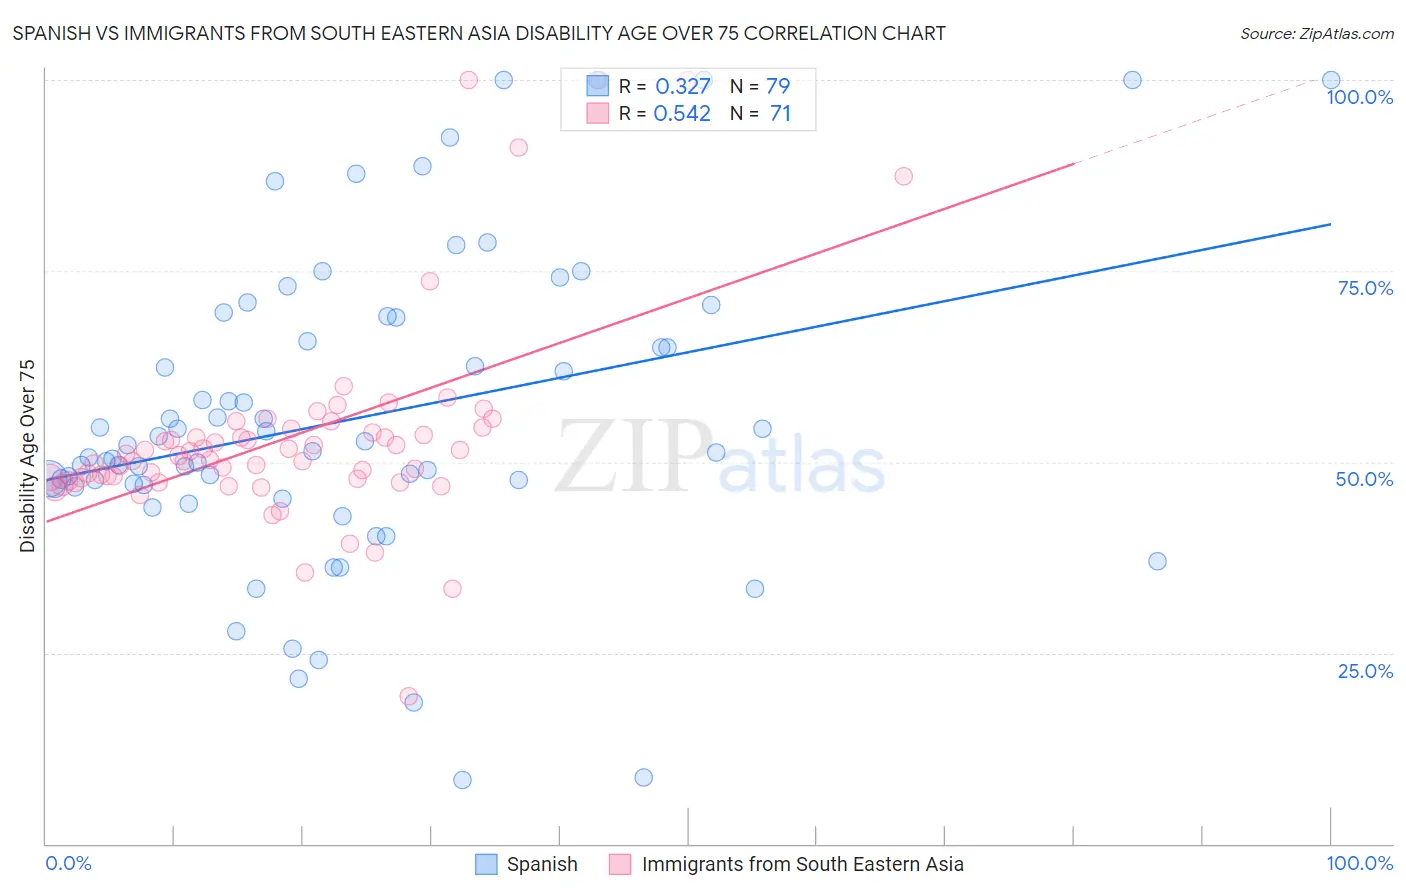 Spanish vs Immigrants from South Eastern Asia Disability Age Over 75